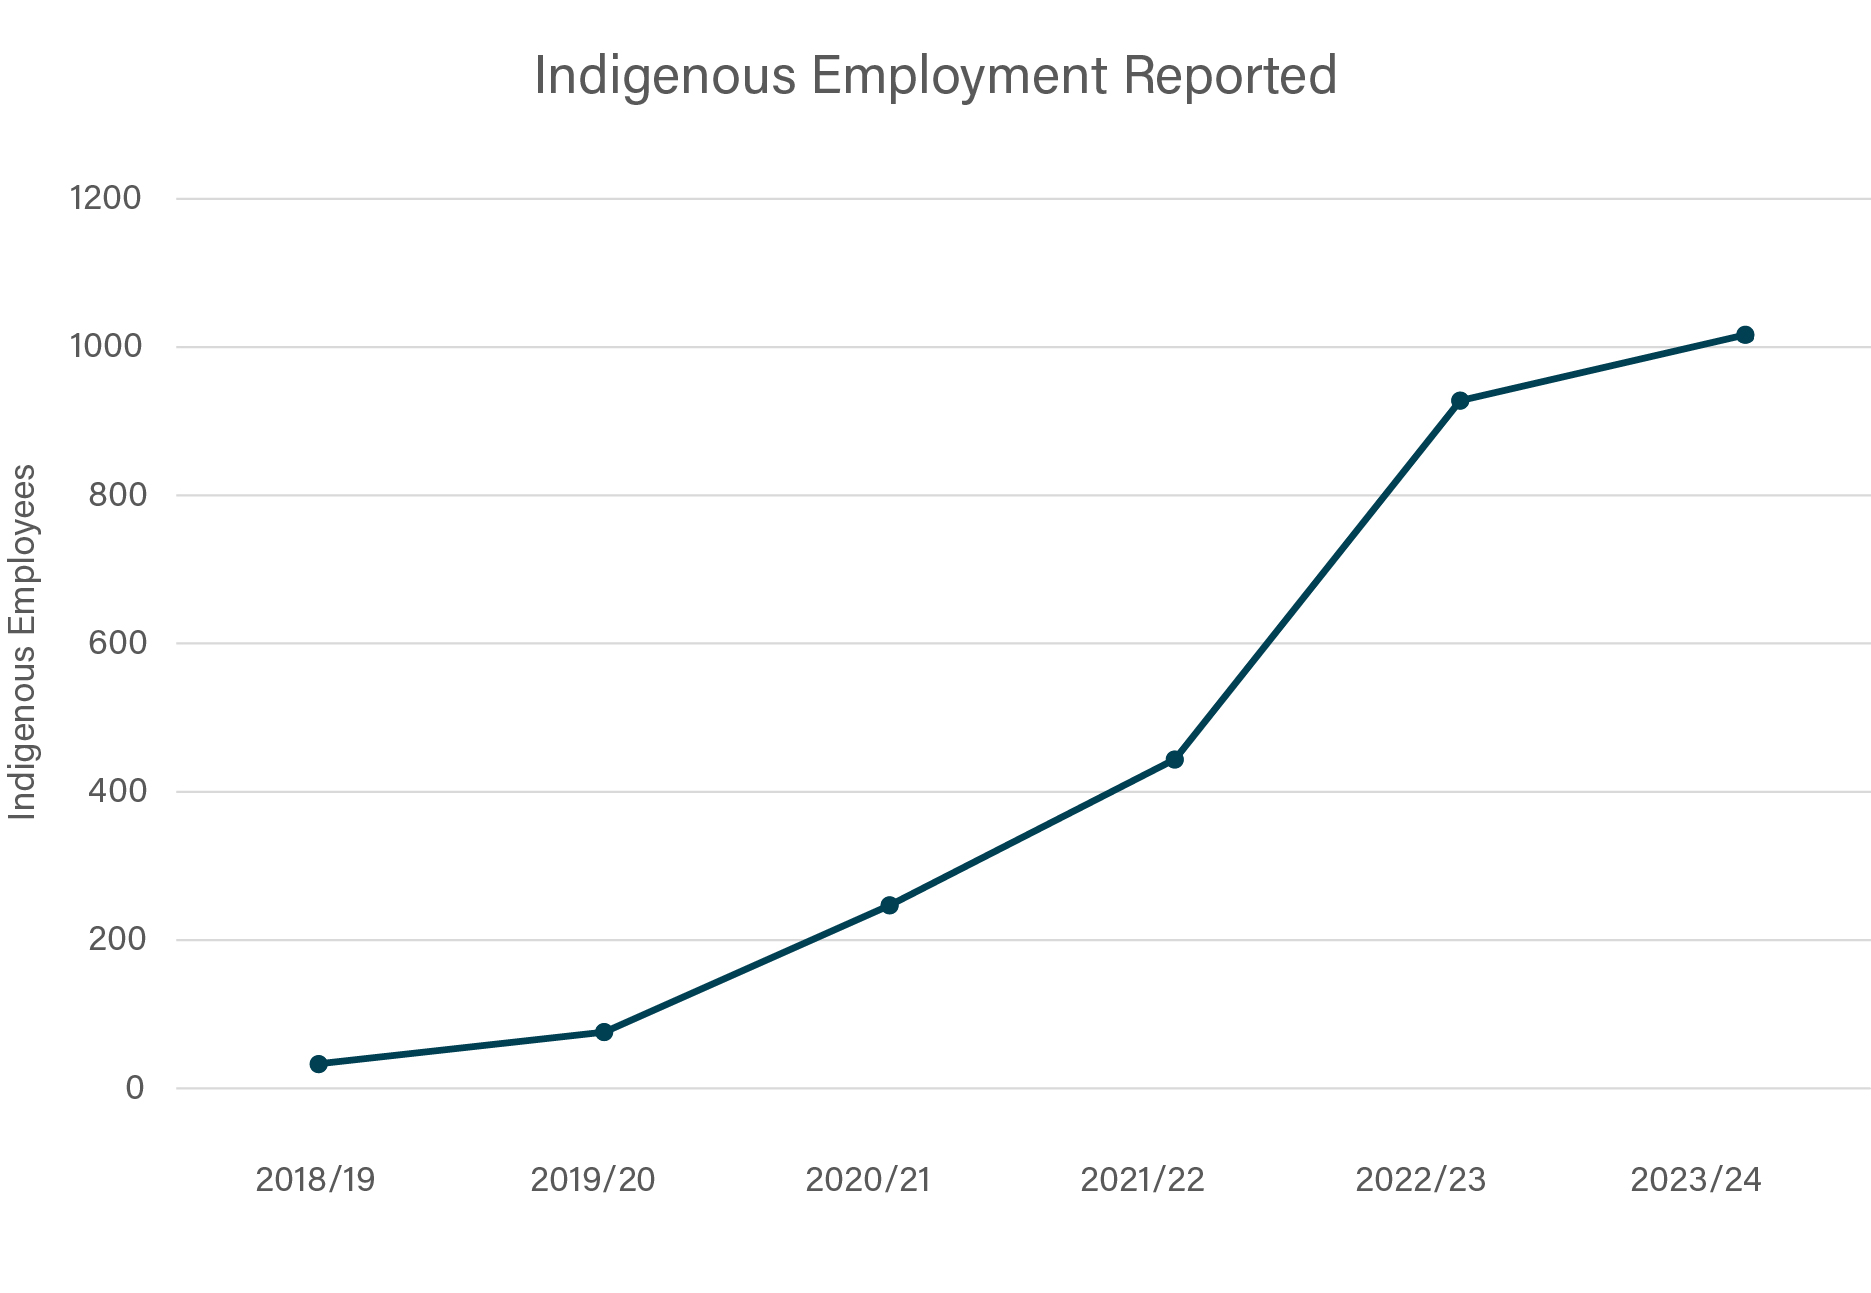 Indigenous Employment Reported as at Jan 24